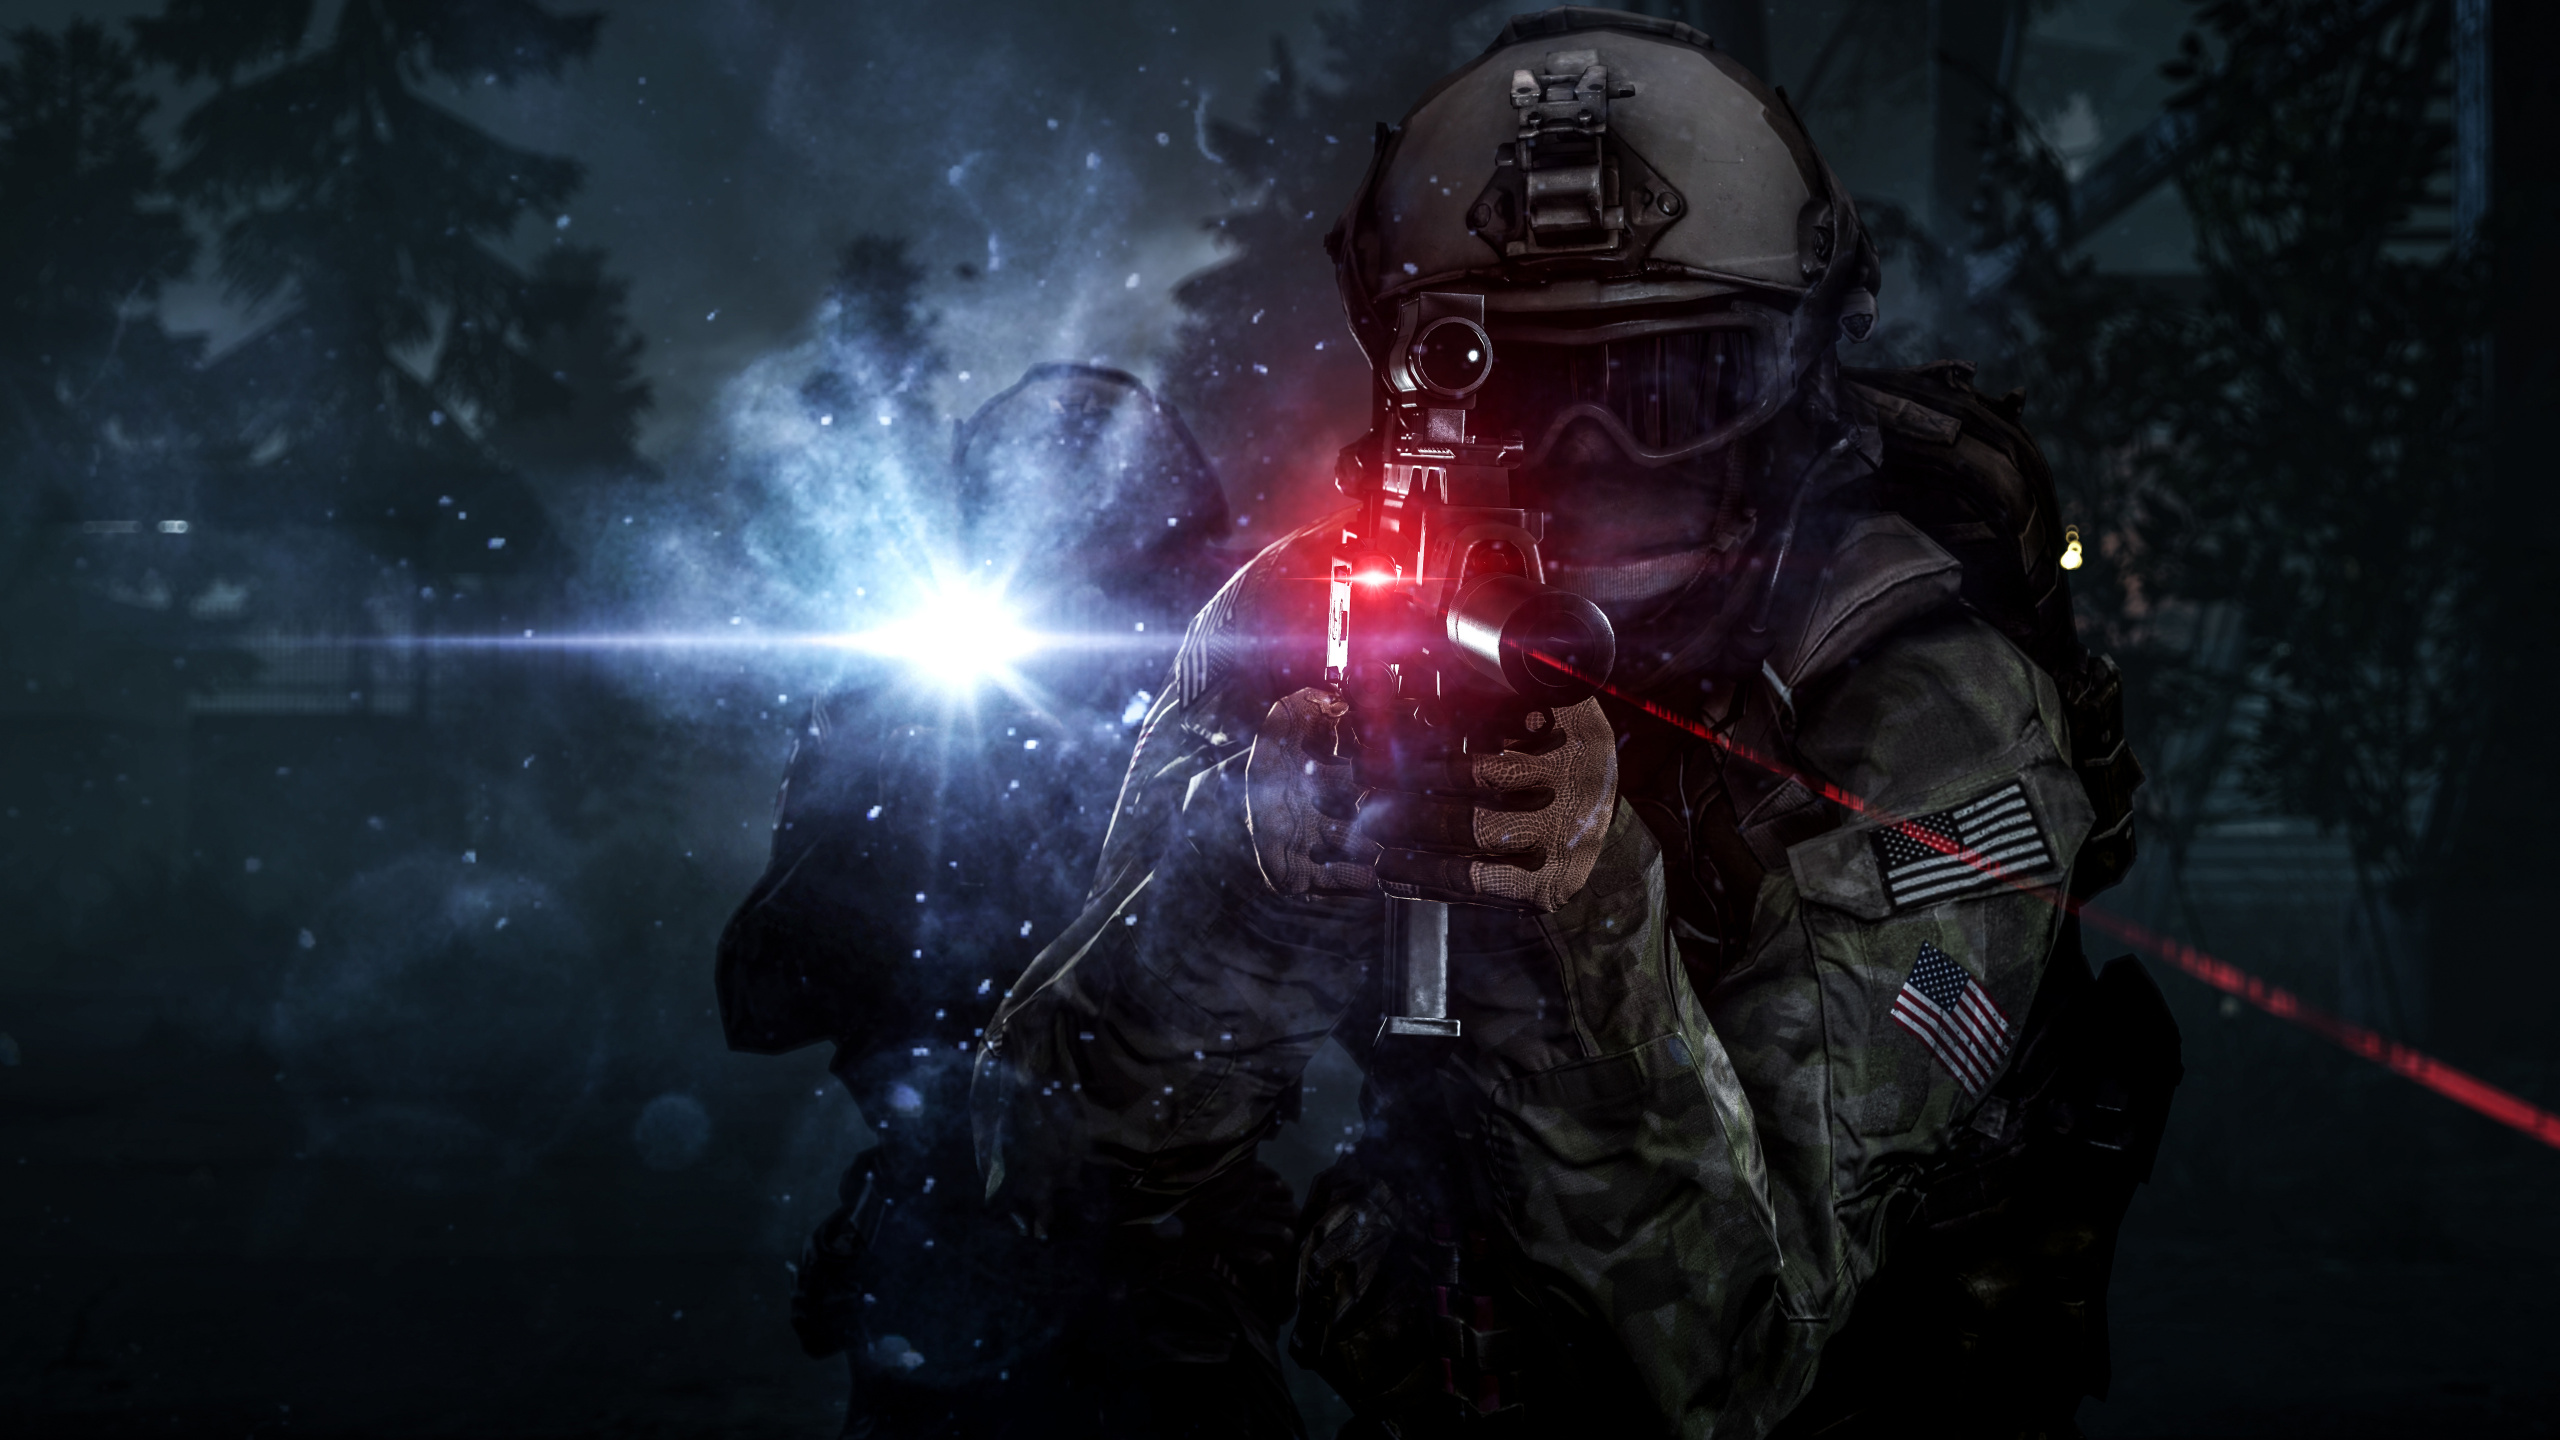 Jeu Pc, Obscurité, Espace, Android, Battlefield 4. Wallpaper in 2560x1440 Resolution